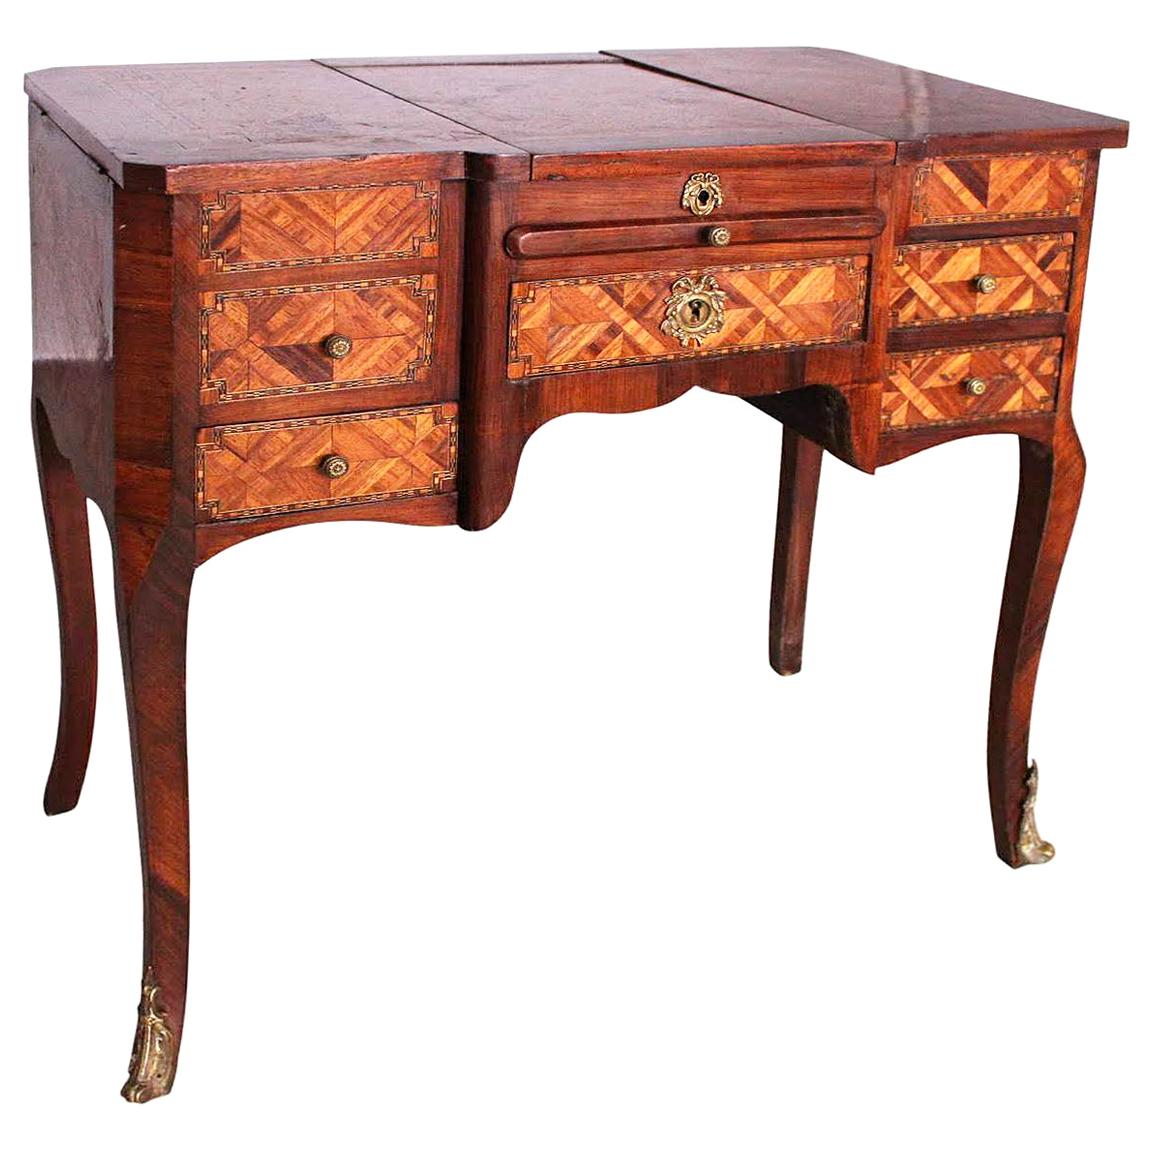 19th Century Dressing Table Vanity Unit French Louis XV Style Marquetry